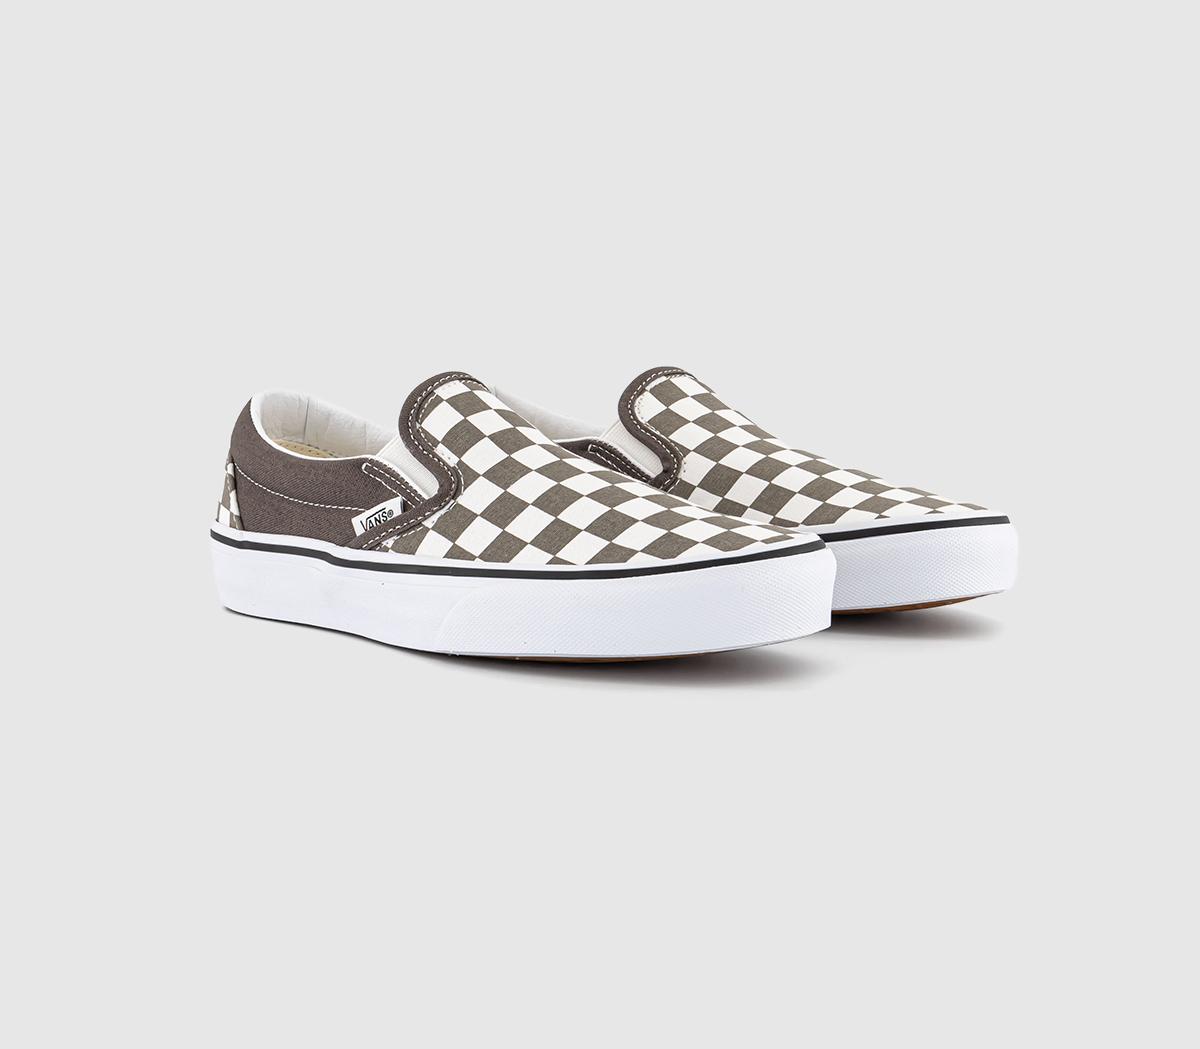 Vans Classic Slip On Trainers Color Theory Checkerboard Bungee Cord Brown/White, 9.5